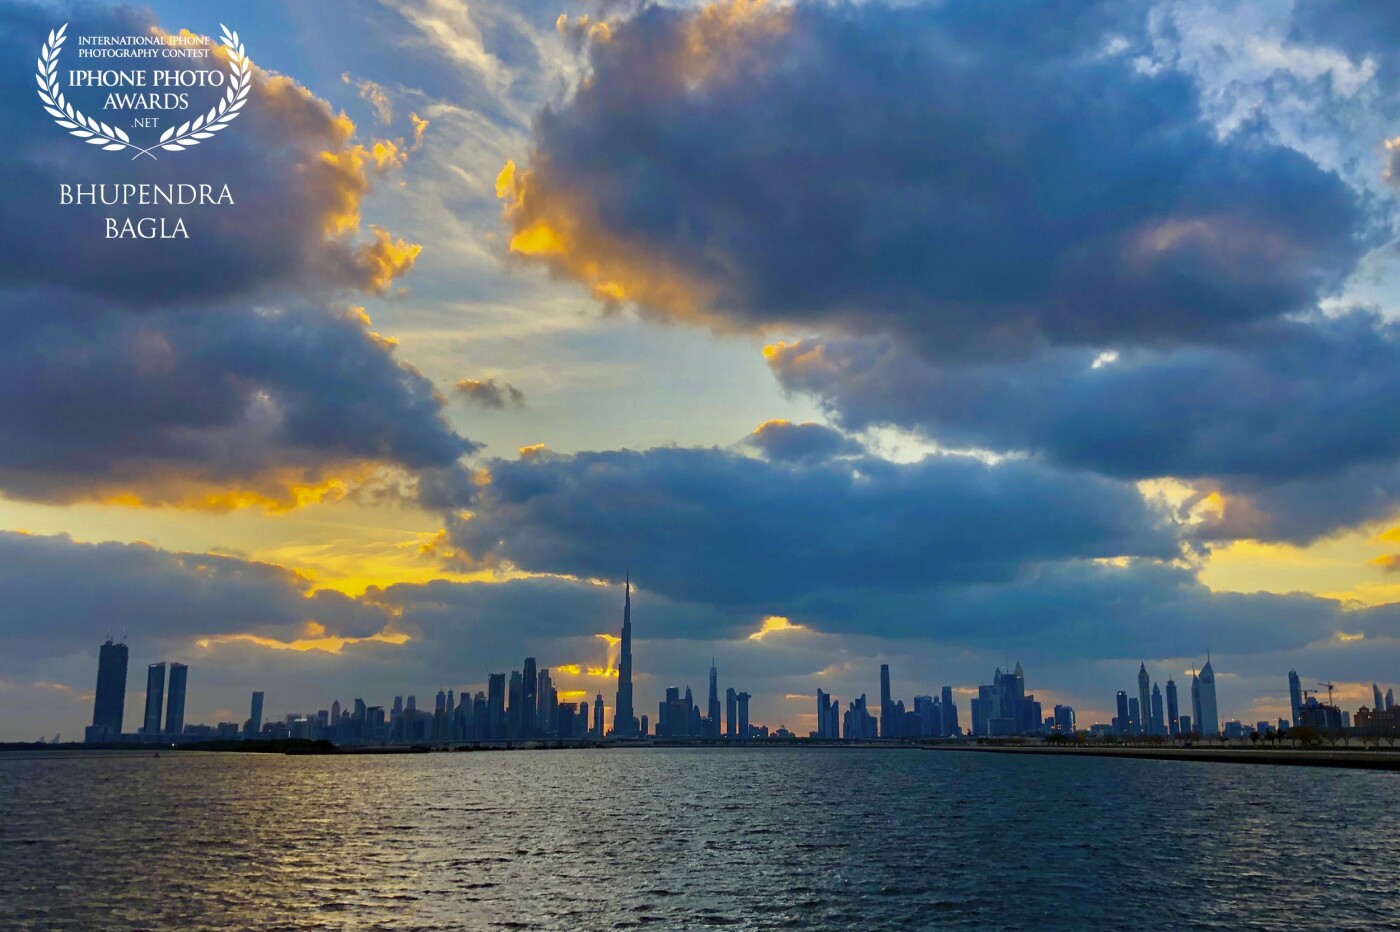 This was shot at Al Jaddaf waterfront. The Dubai skyline looked amazing while the heavy fluffy clouds and sunset made it look picture perfect. It was a moment worth capturing and my iPhone was always handy. 